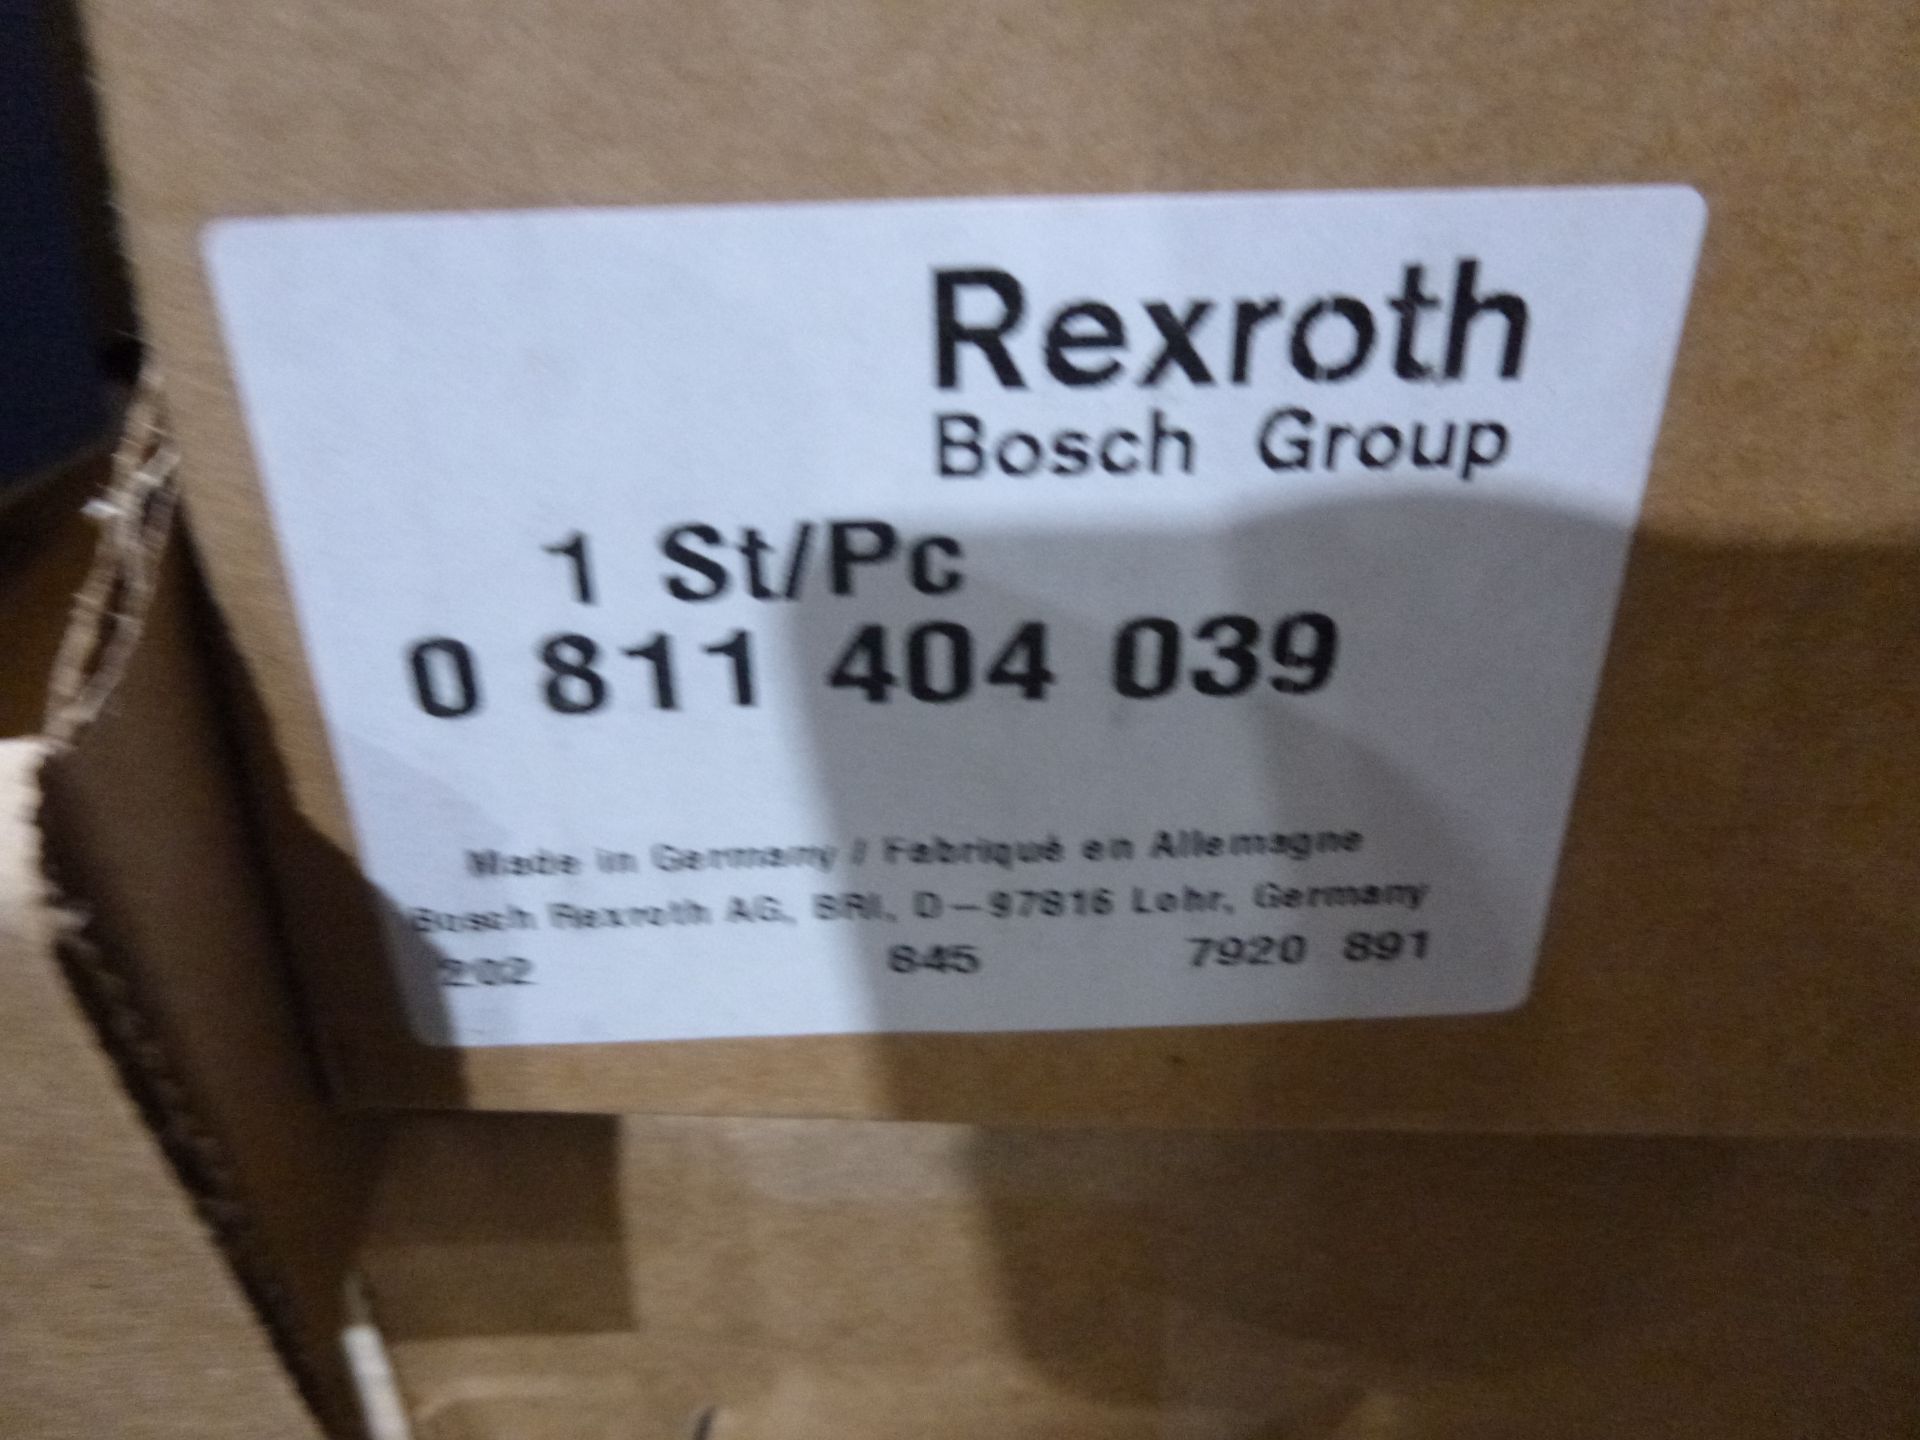 Rexroth valve part number 0811404039, new as pictured, as always with Brolyn LLC auctions, all - Image 2 of 3